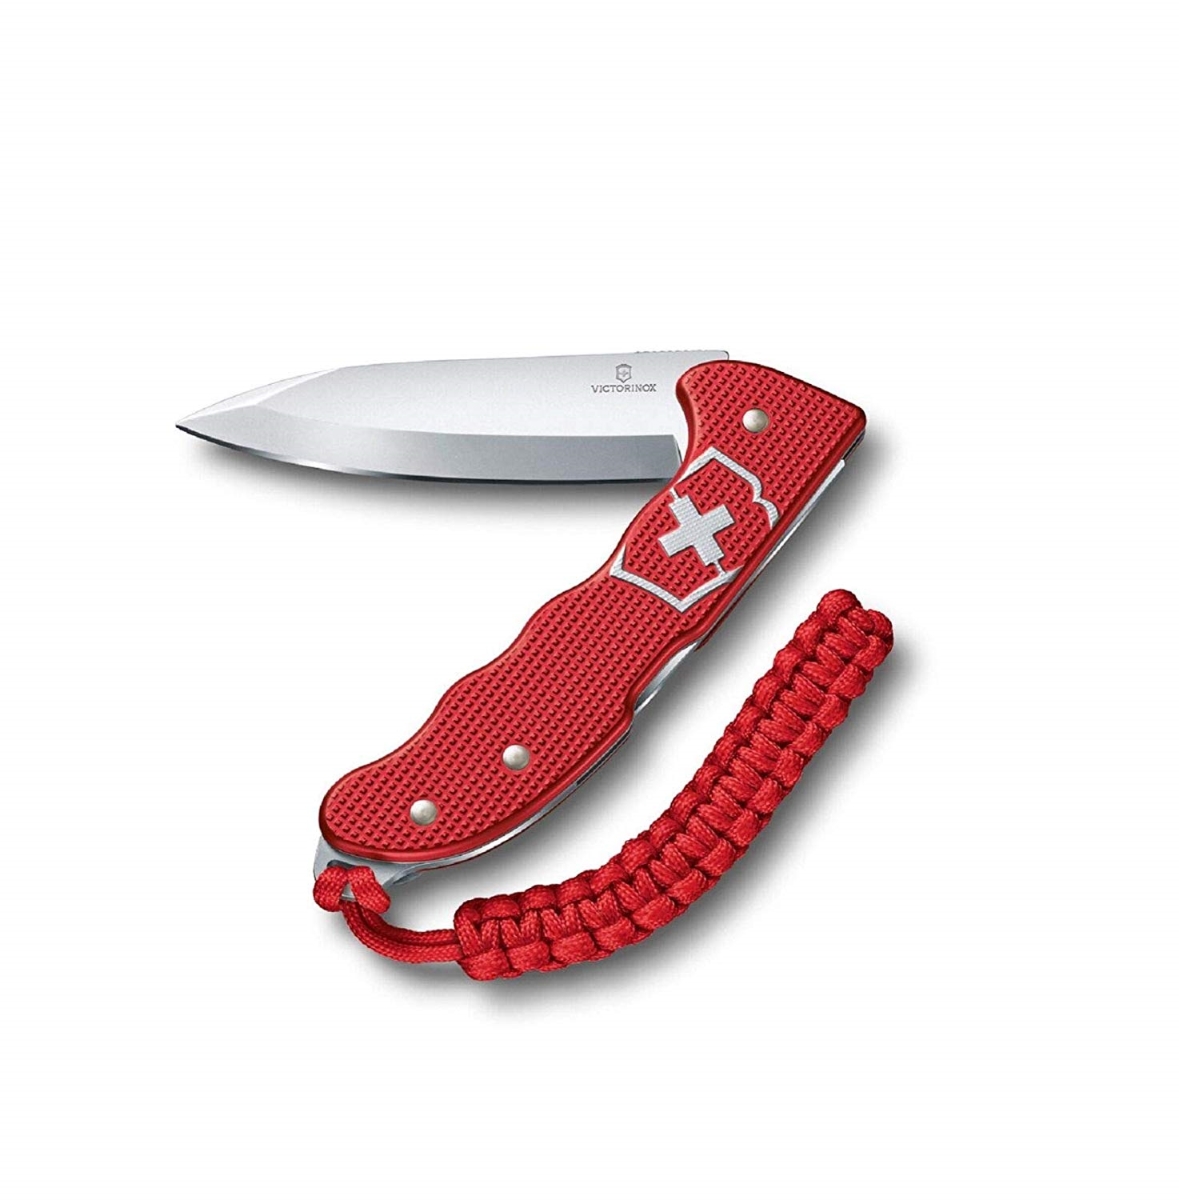 Swiss Army Brands VIC-0.9415.20 2019N Victorinox Hunter Pro Alox Knife with Clip & Paracord, Red - 130 mm -  Swiss Arms